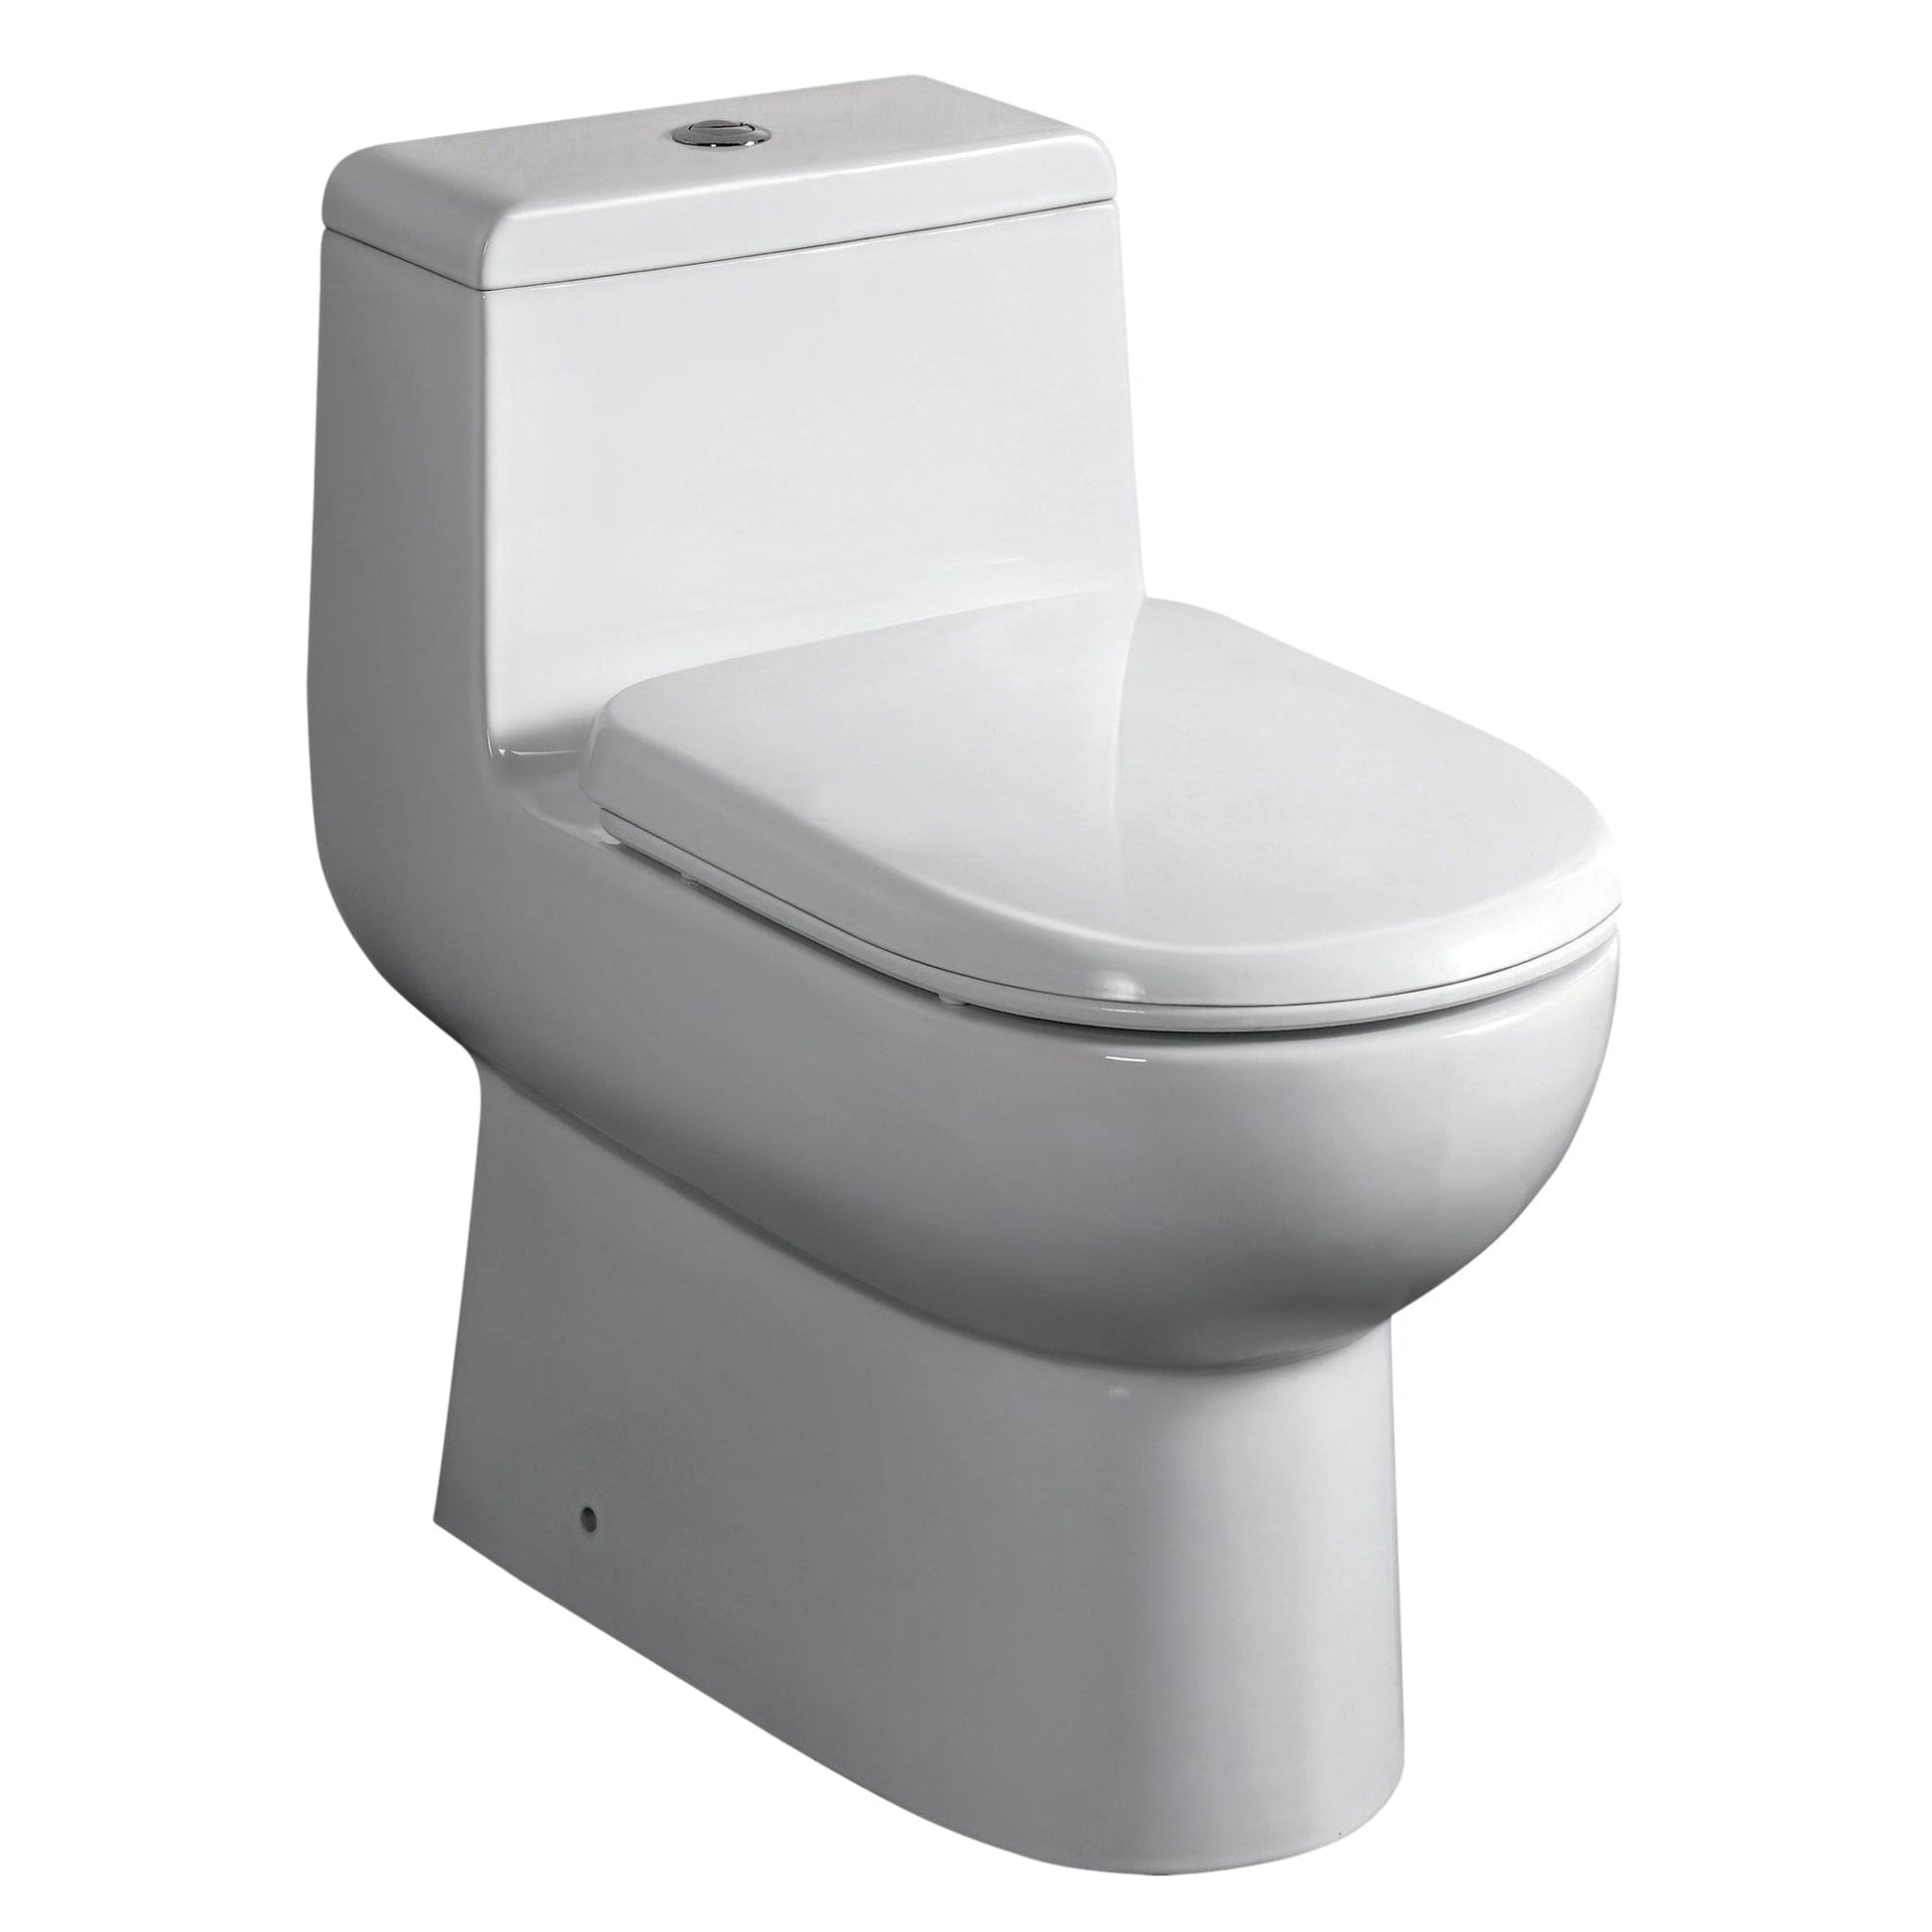 Whitehaus Magic Flush WHMFL3351-EB Eco-Friendly One Piece Toilet With a Siphonic Action Dual Flush System